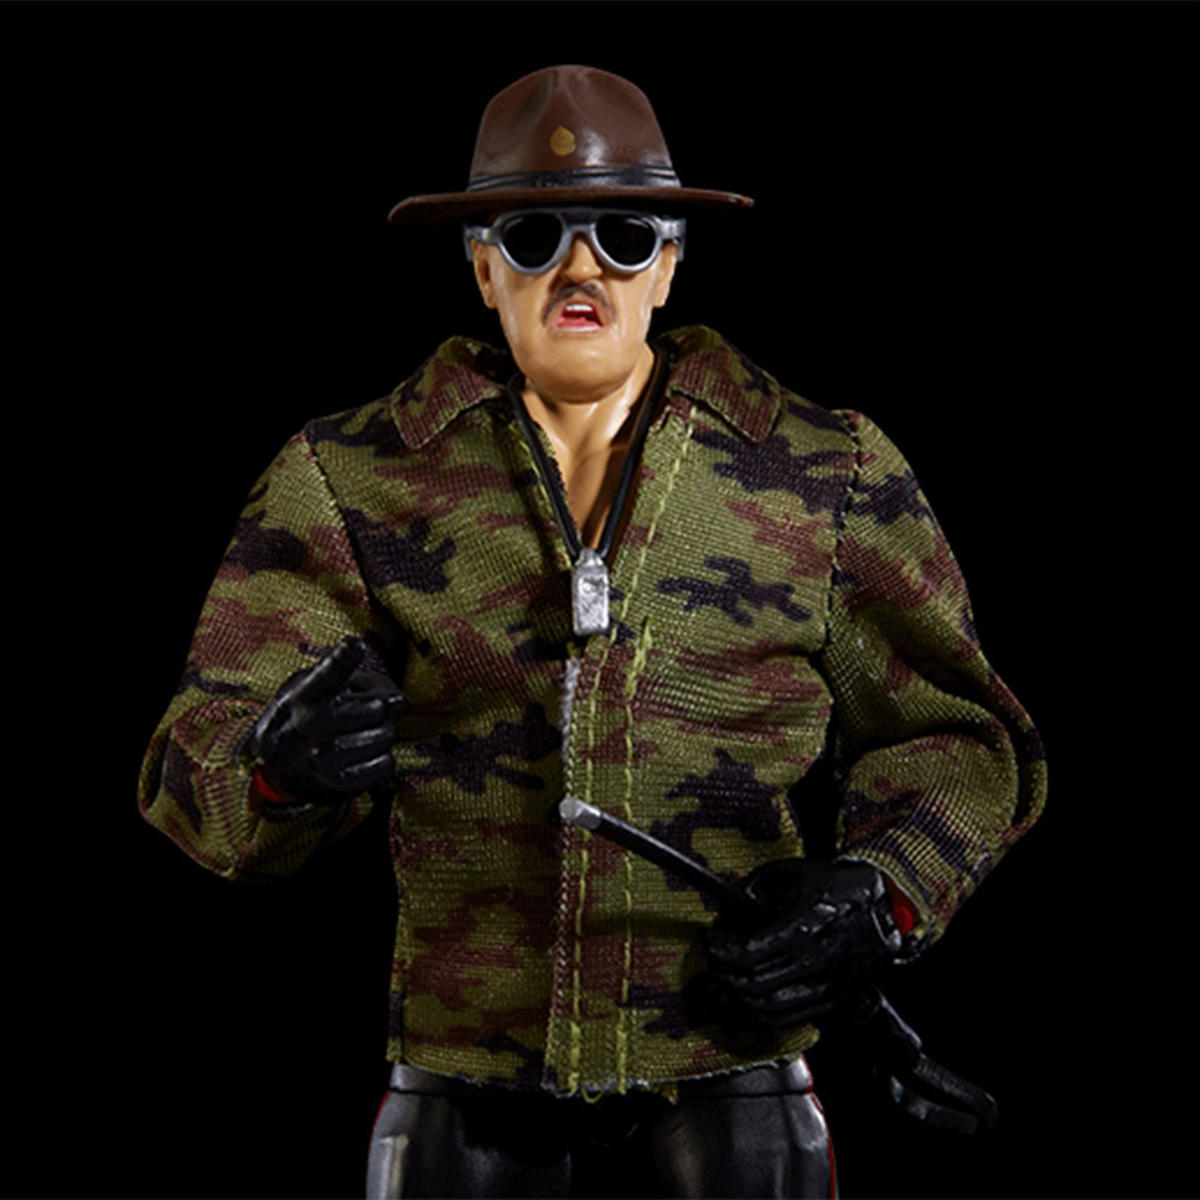 2021 WWE Mattel Ultimate Edition SDCC Exclusive Sgt. Slaughter [Chase]